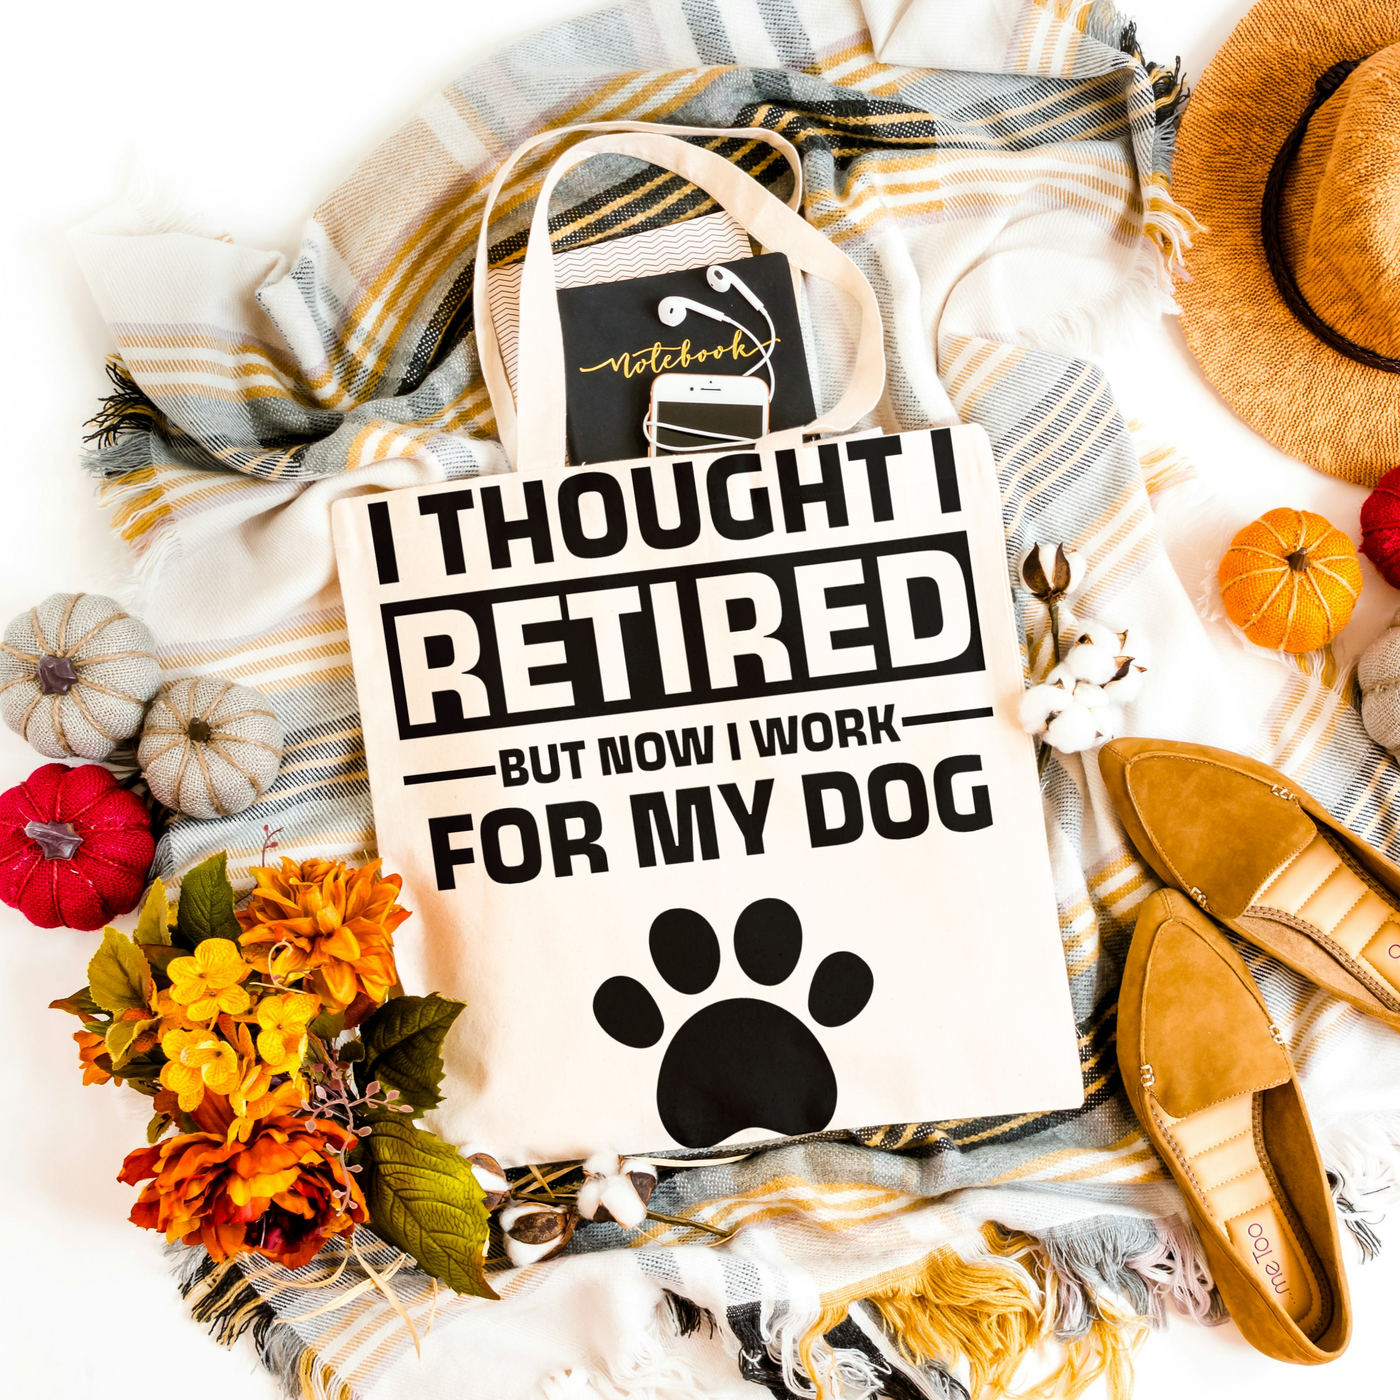 I Thought I Retired But Now I Work For My Dog Tote Bag